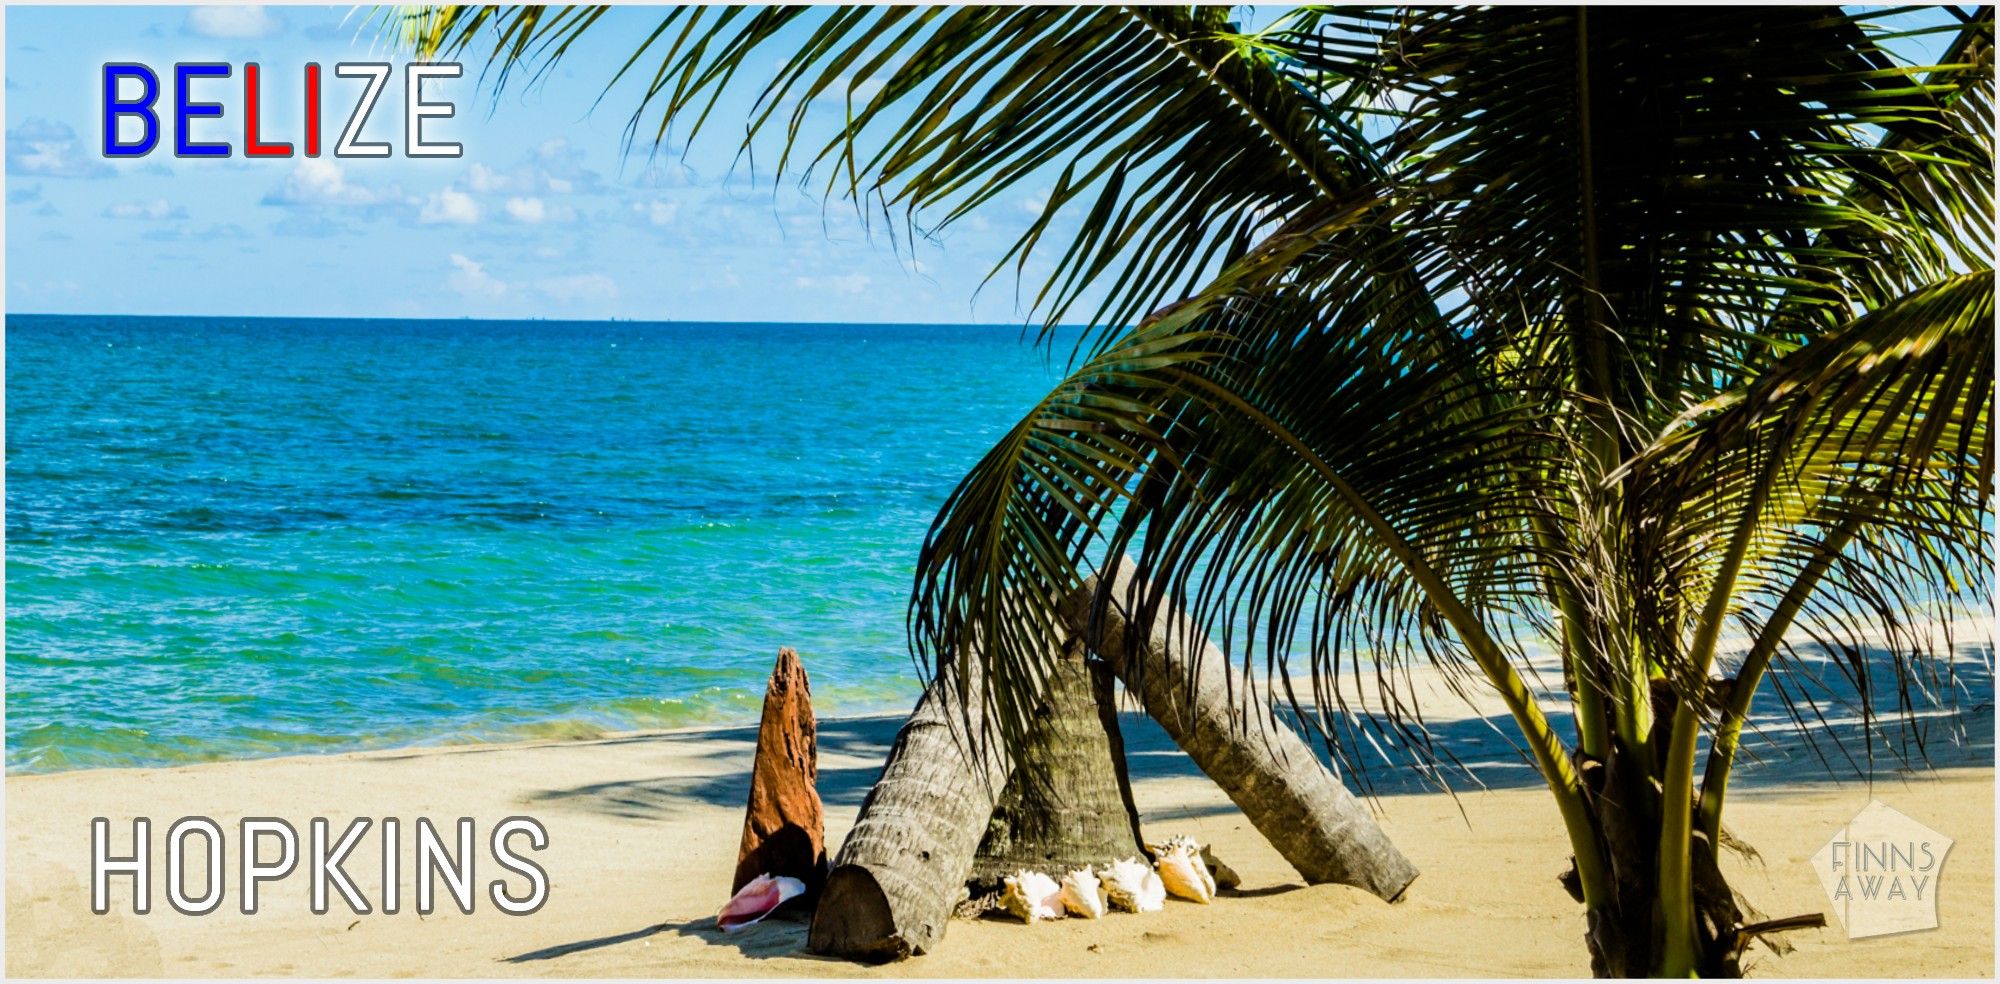 Tropical beaches and Garifuna culture - Travel guide to Hopkins, Belize | FinnsAway Travel Blog